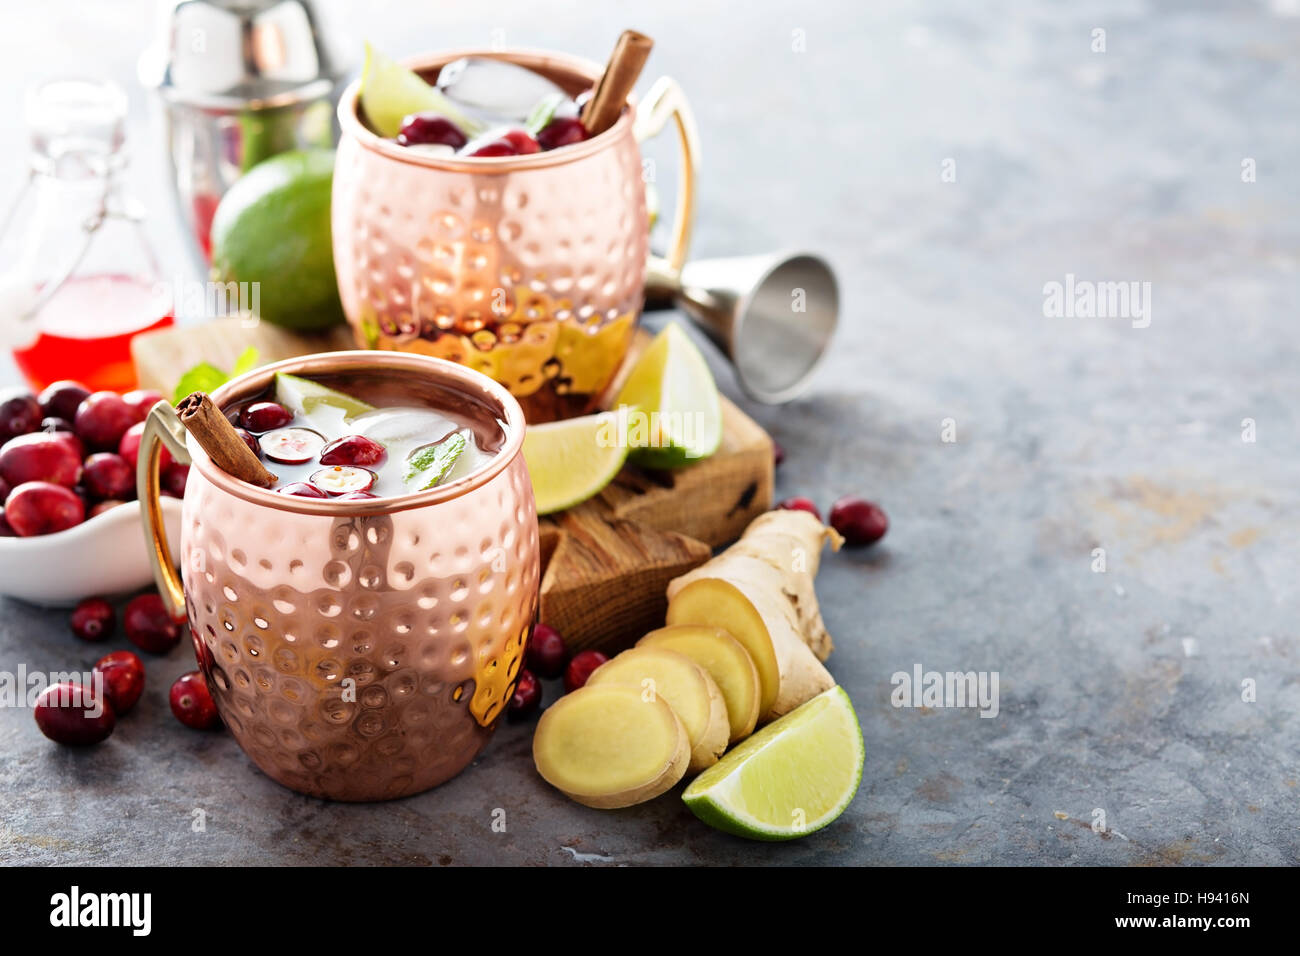 Moscow mule cocktail with ginger and cranberry Stock Photo